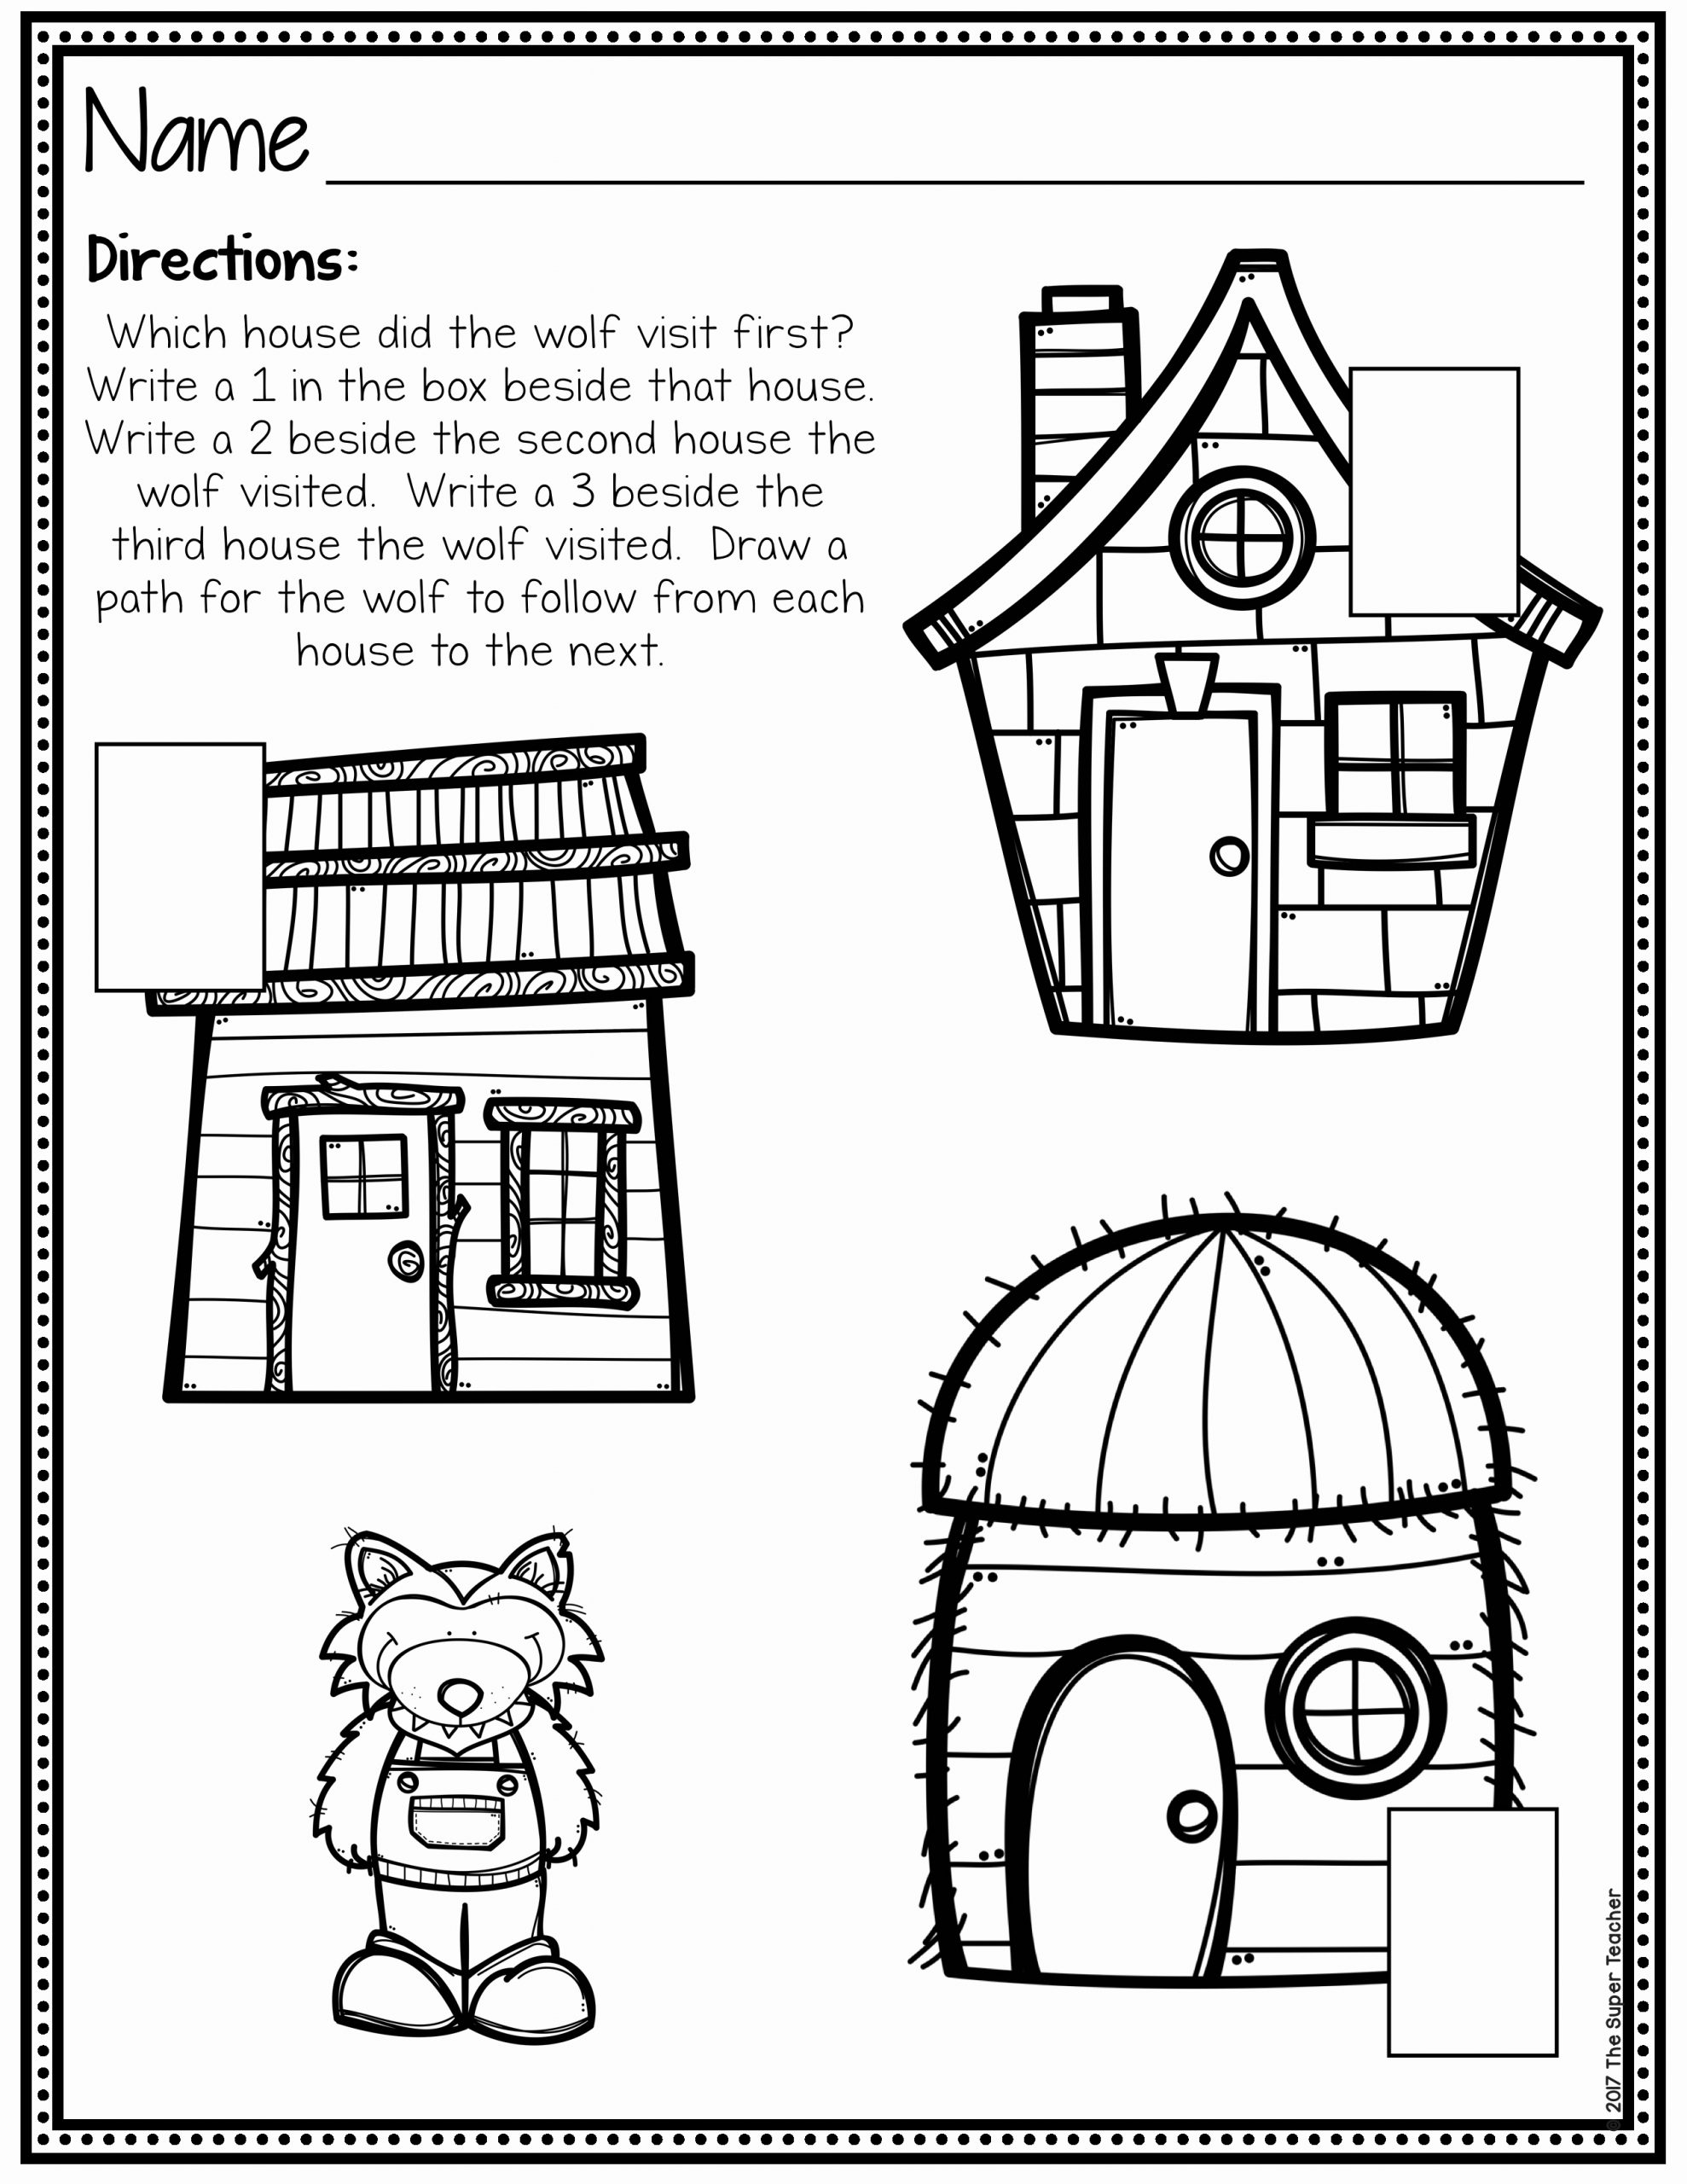 Three Little Pigs Worksheets Awesome Three Little Pigs Story Elements and Story Retelling